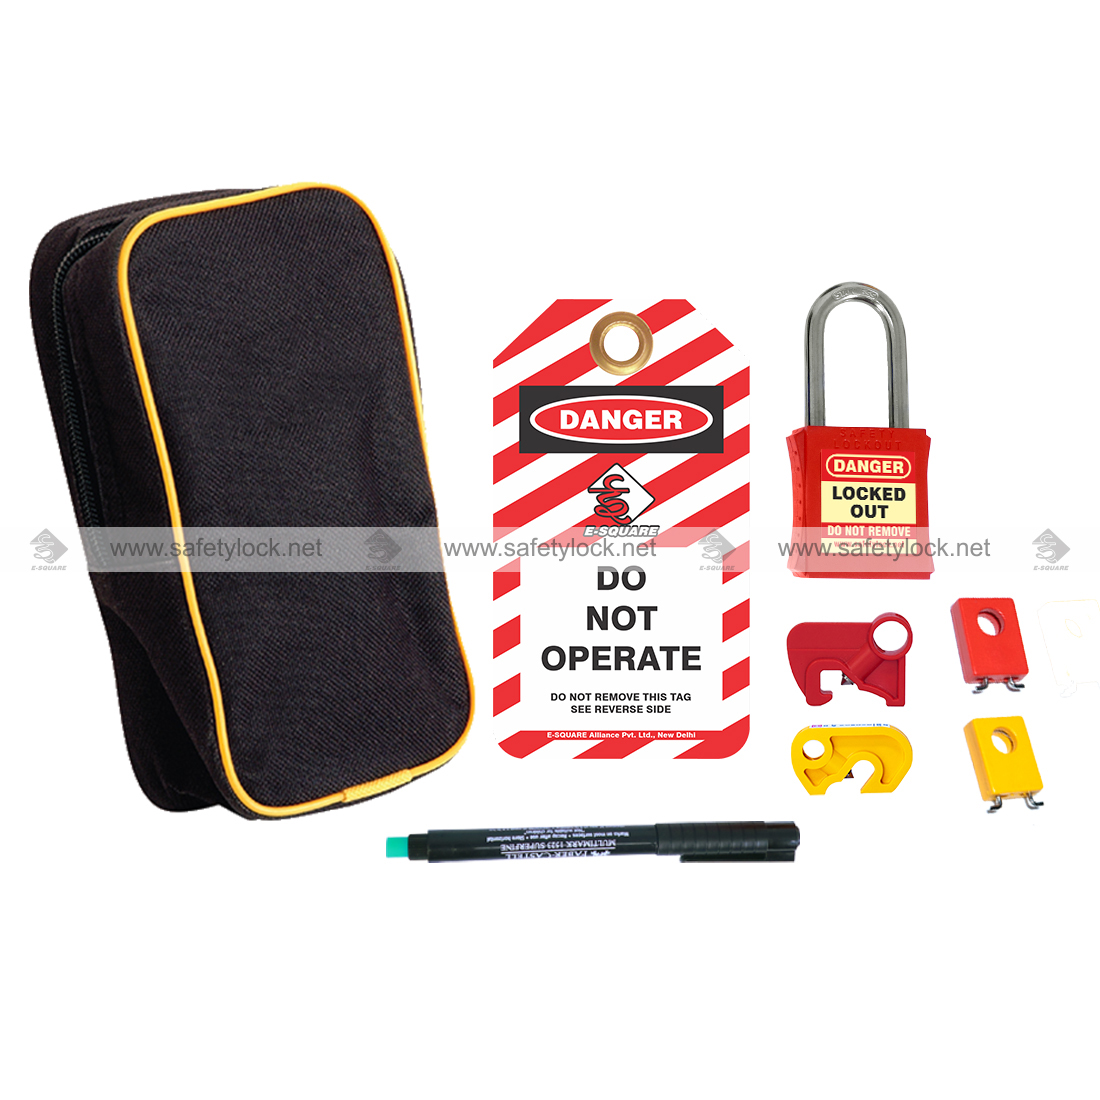 Customised Your Ideal Lockout Tagout Kit with ESquare Allia - Delhi - Delhi ID1557058 2